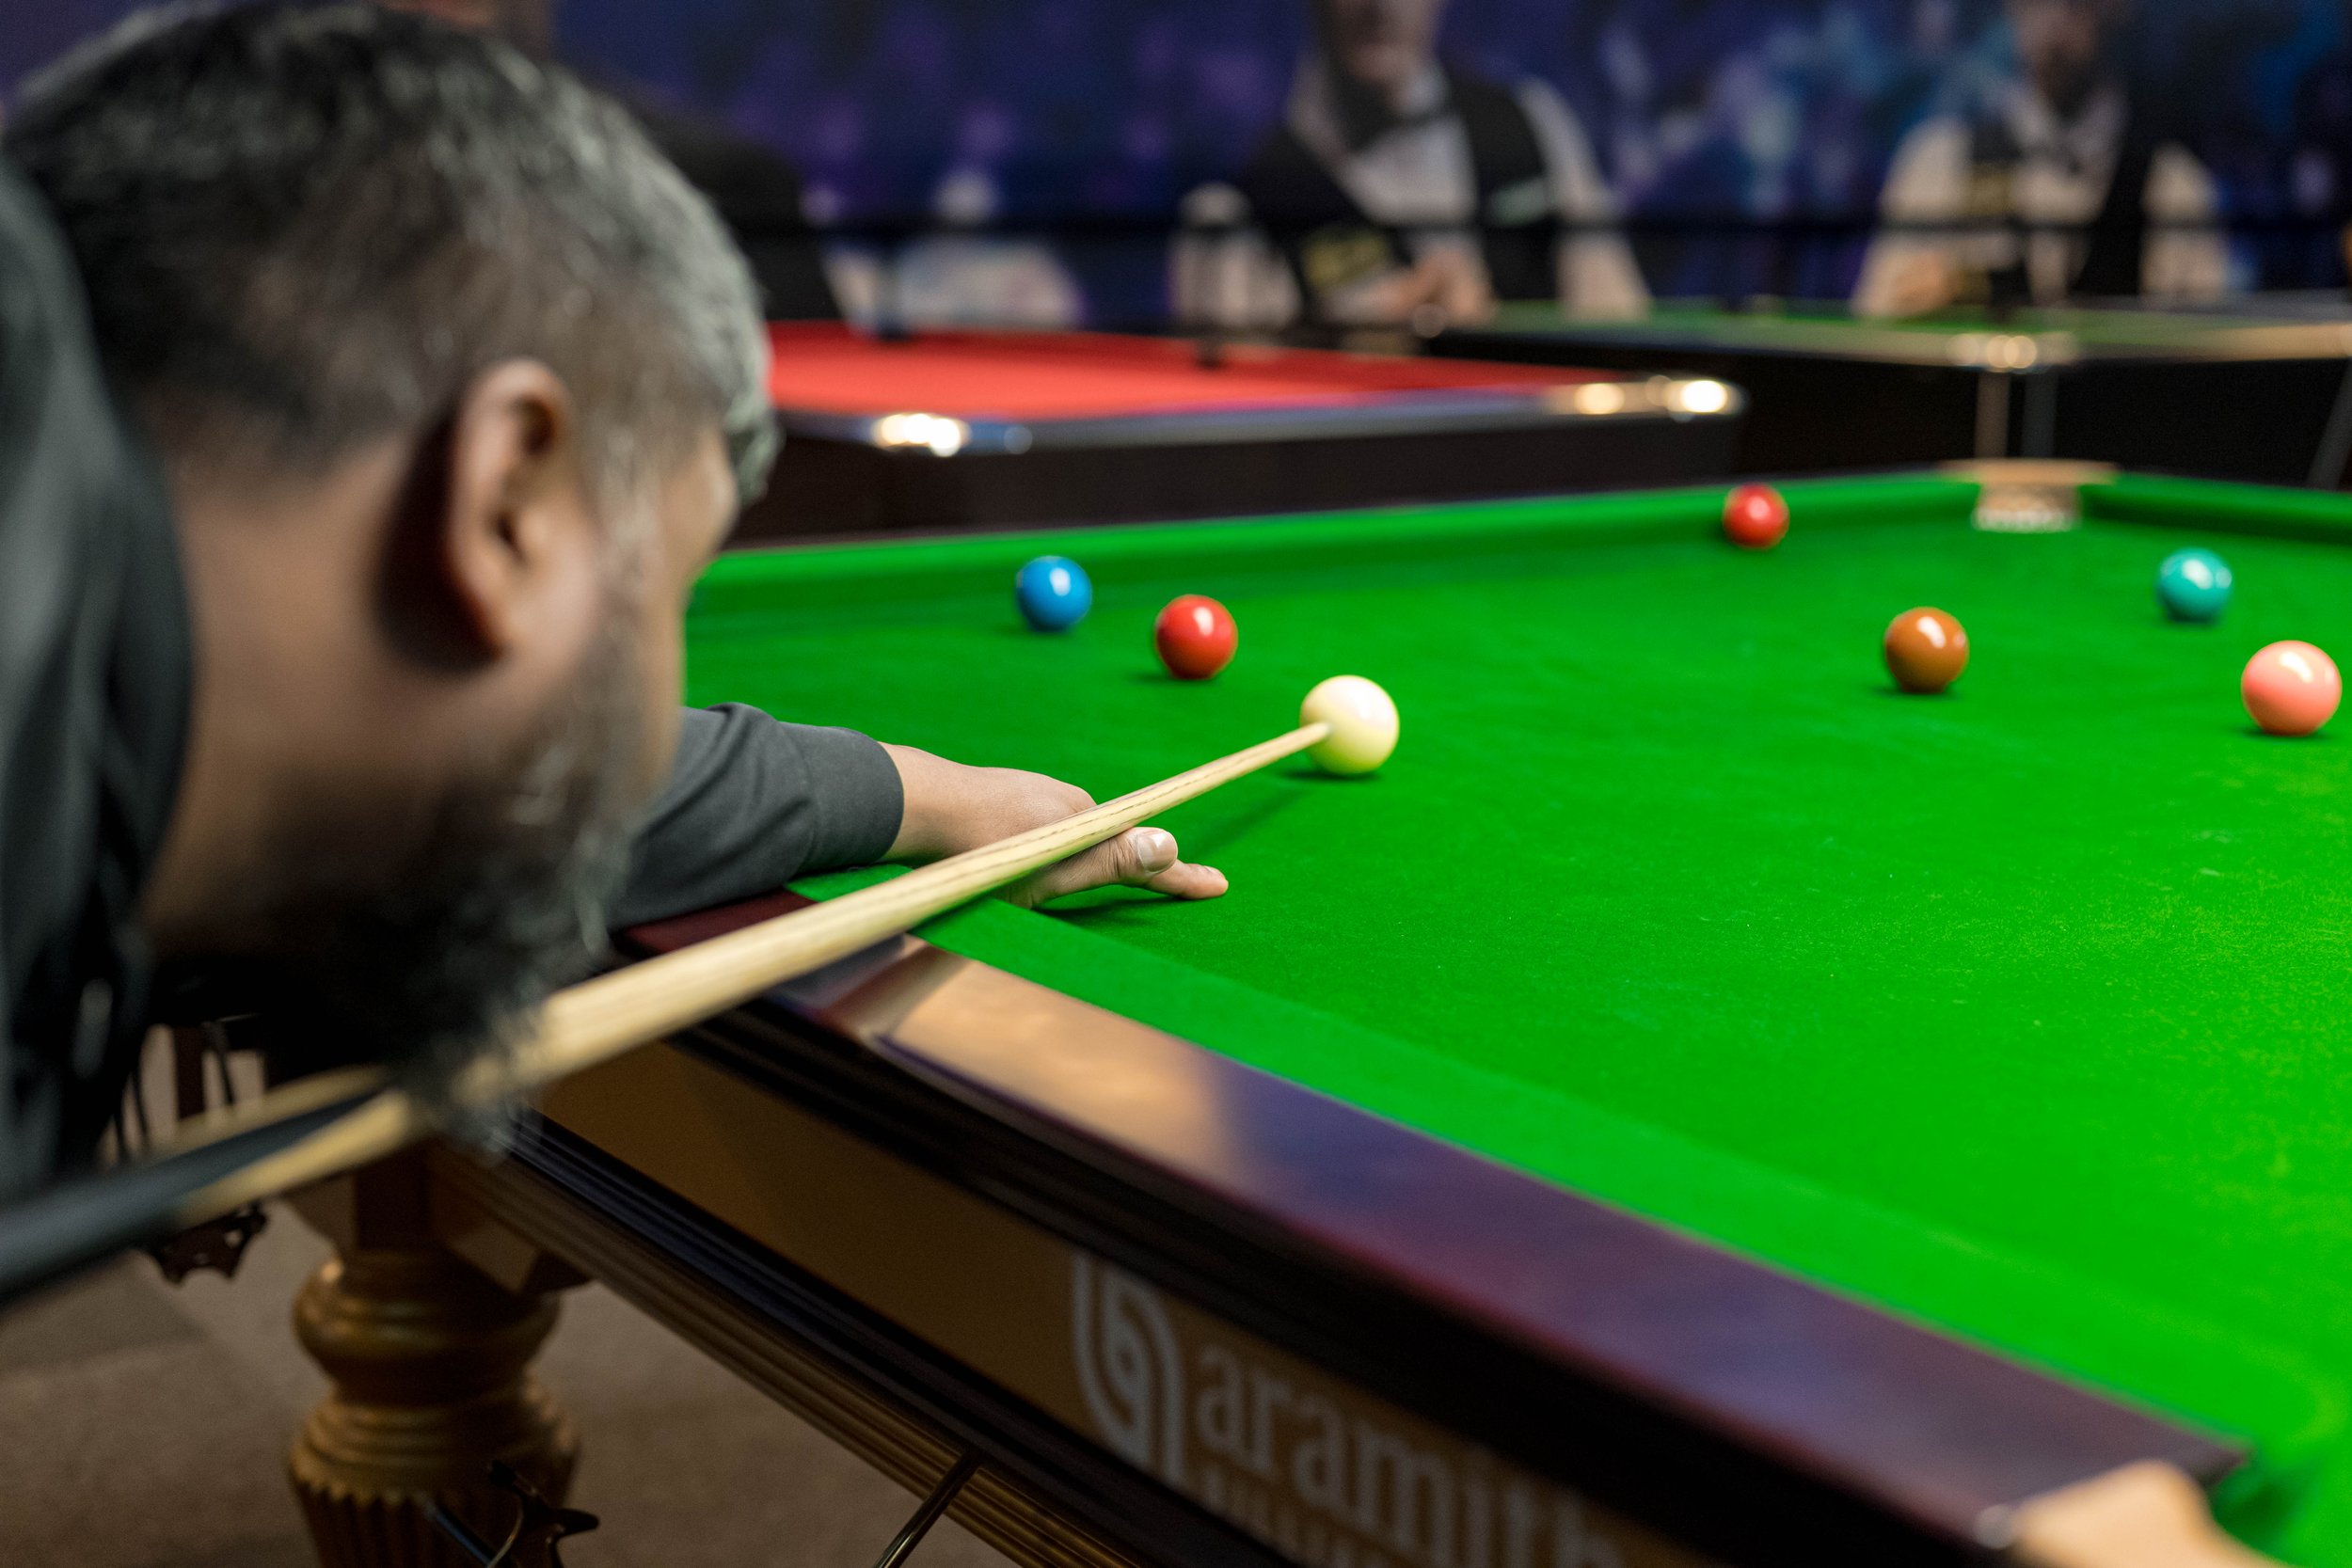 &lt;strong&gt;AS USED BY PROFESSIONALS&lt;/strong&gt; &lt;a href=/book-snooker-table-southampton&gt; BOOK NOW ↑&lt;/a&gt;